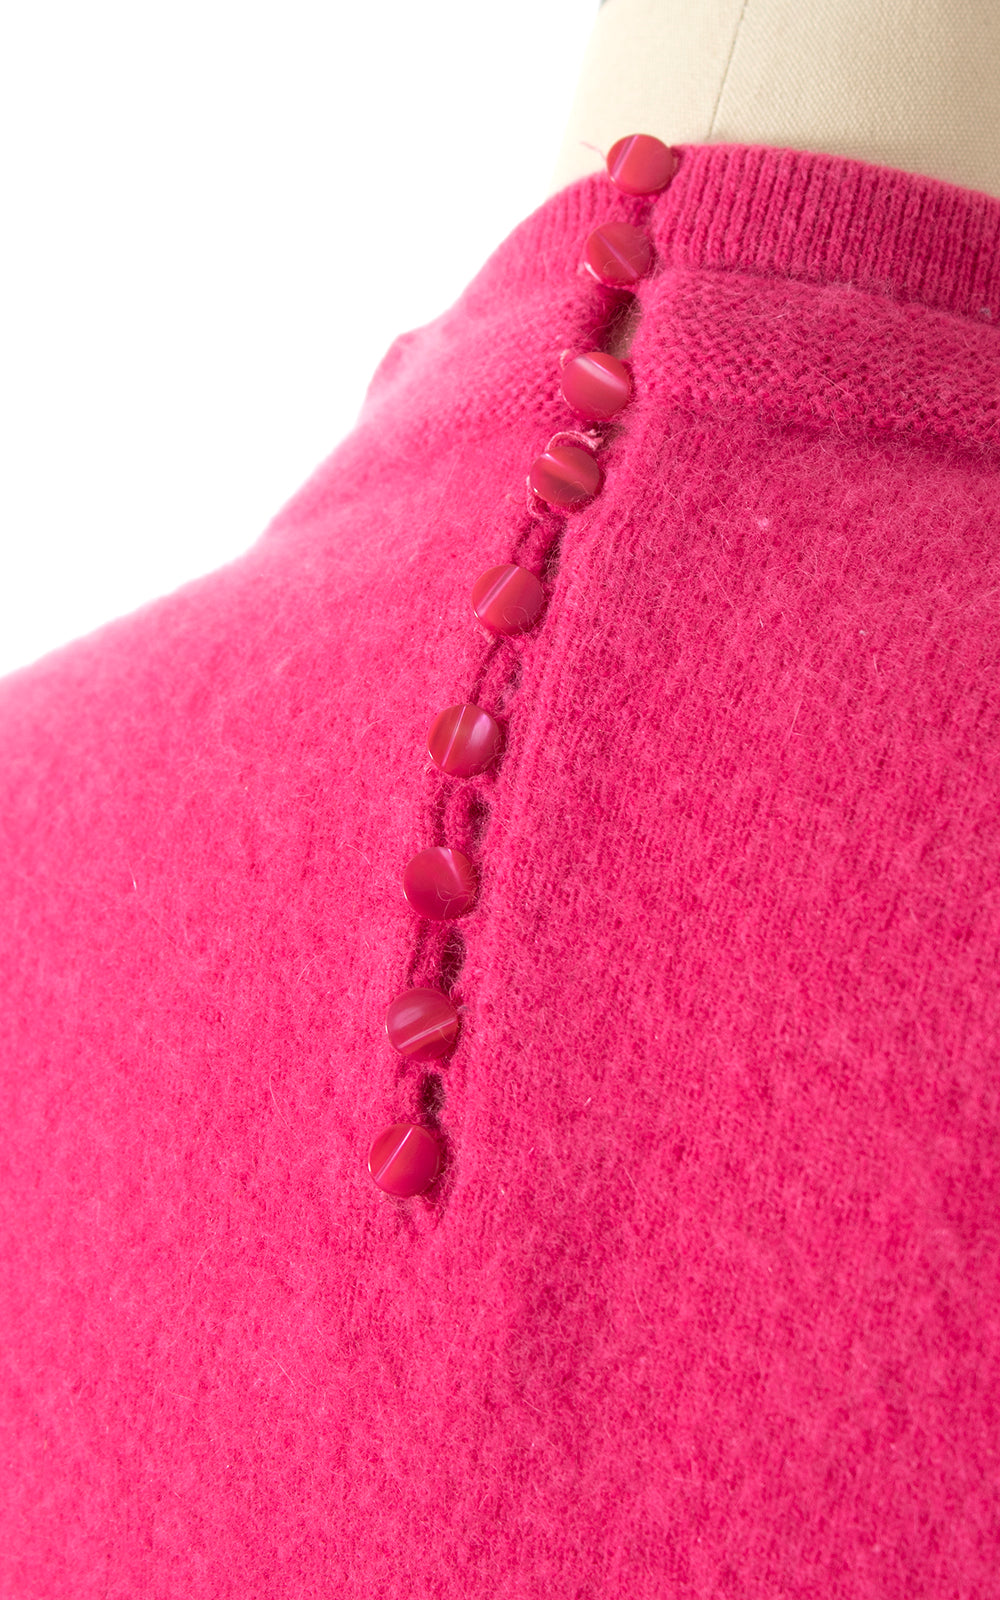 Vintage 1950s Hot Pink Knit Wool Angora Pullover Sweater Top Birthday Life Vintage